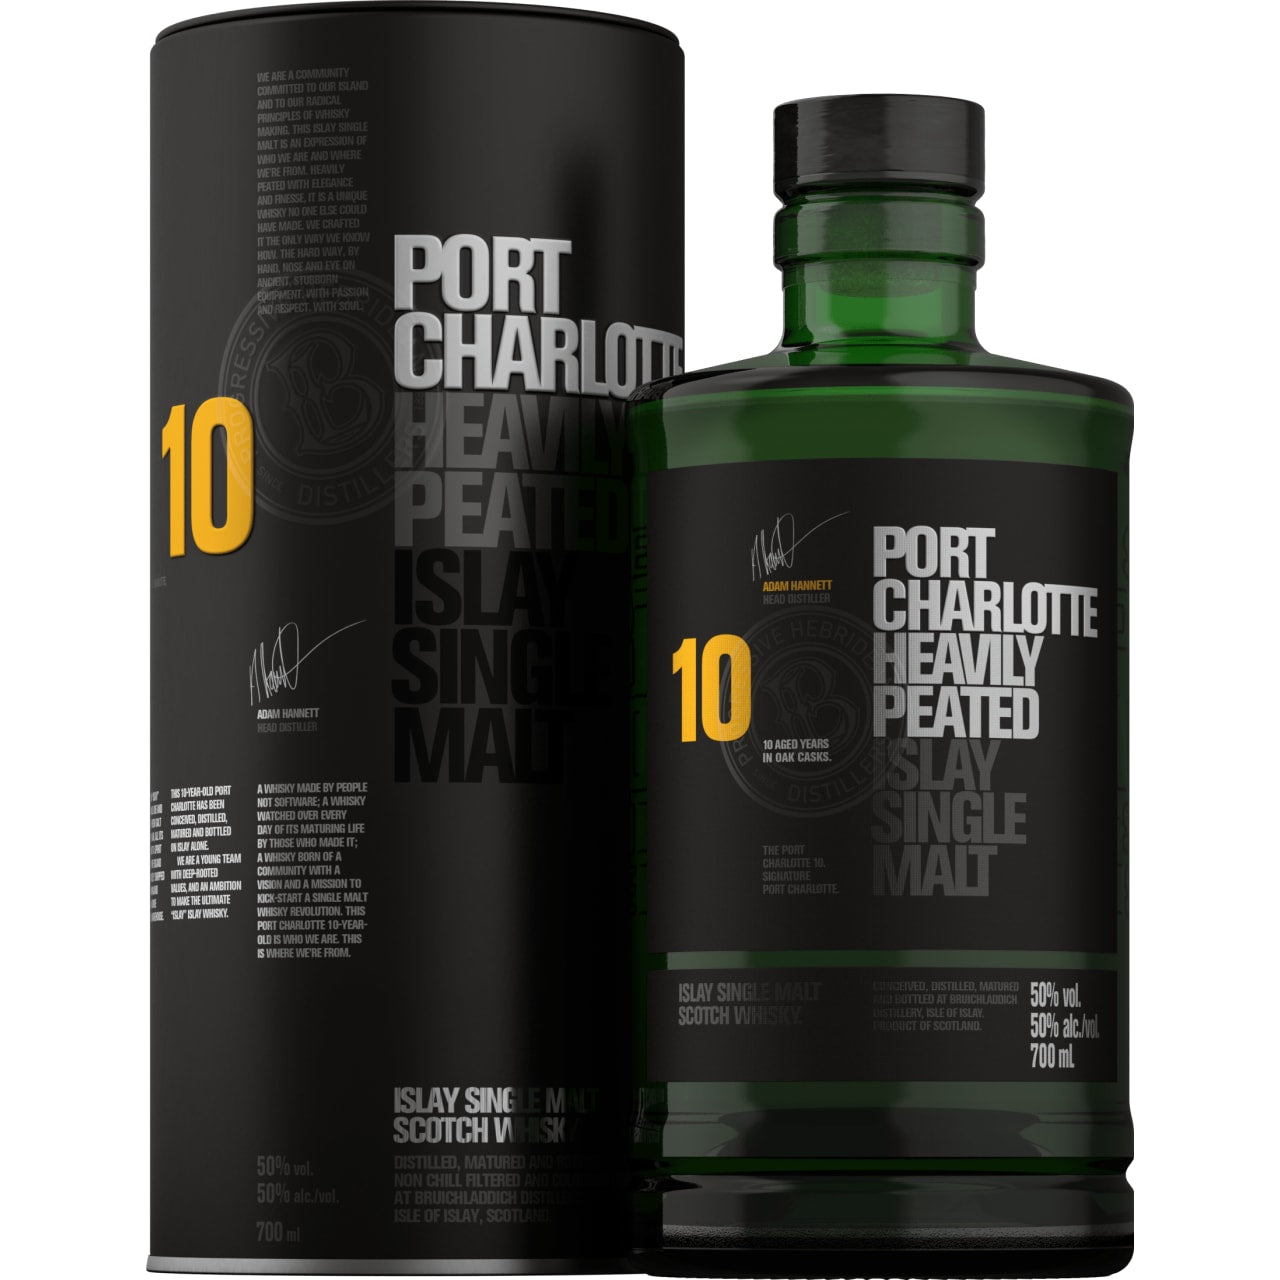 This 10 year old single malt from the Isle of Islay is a lip-smackingly smoky number indeed. It's peated to 40ppm, and drawn from a combination of first-fill American whiskey casks, second-fill American whiskey casks and second-fill French wine casks.